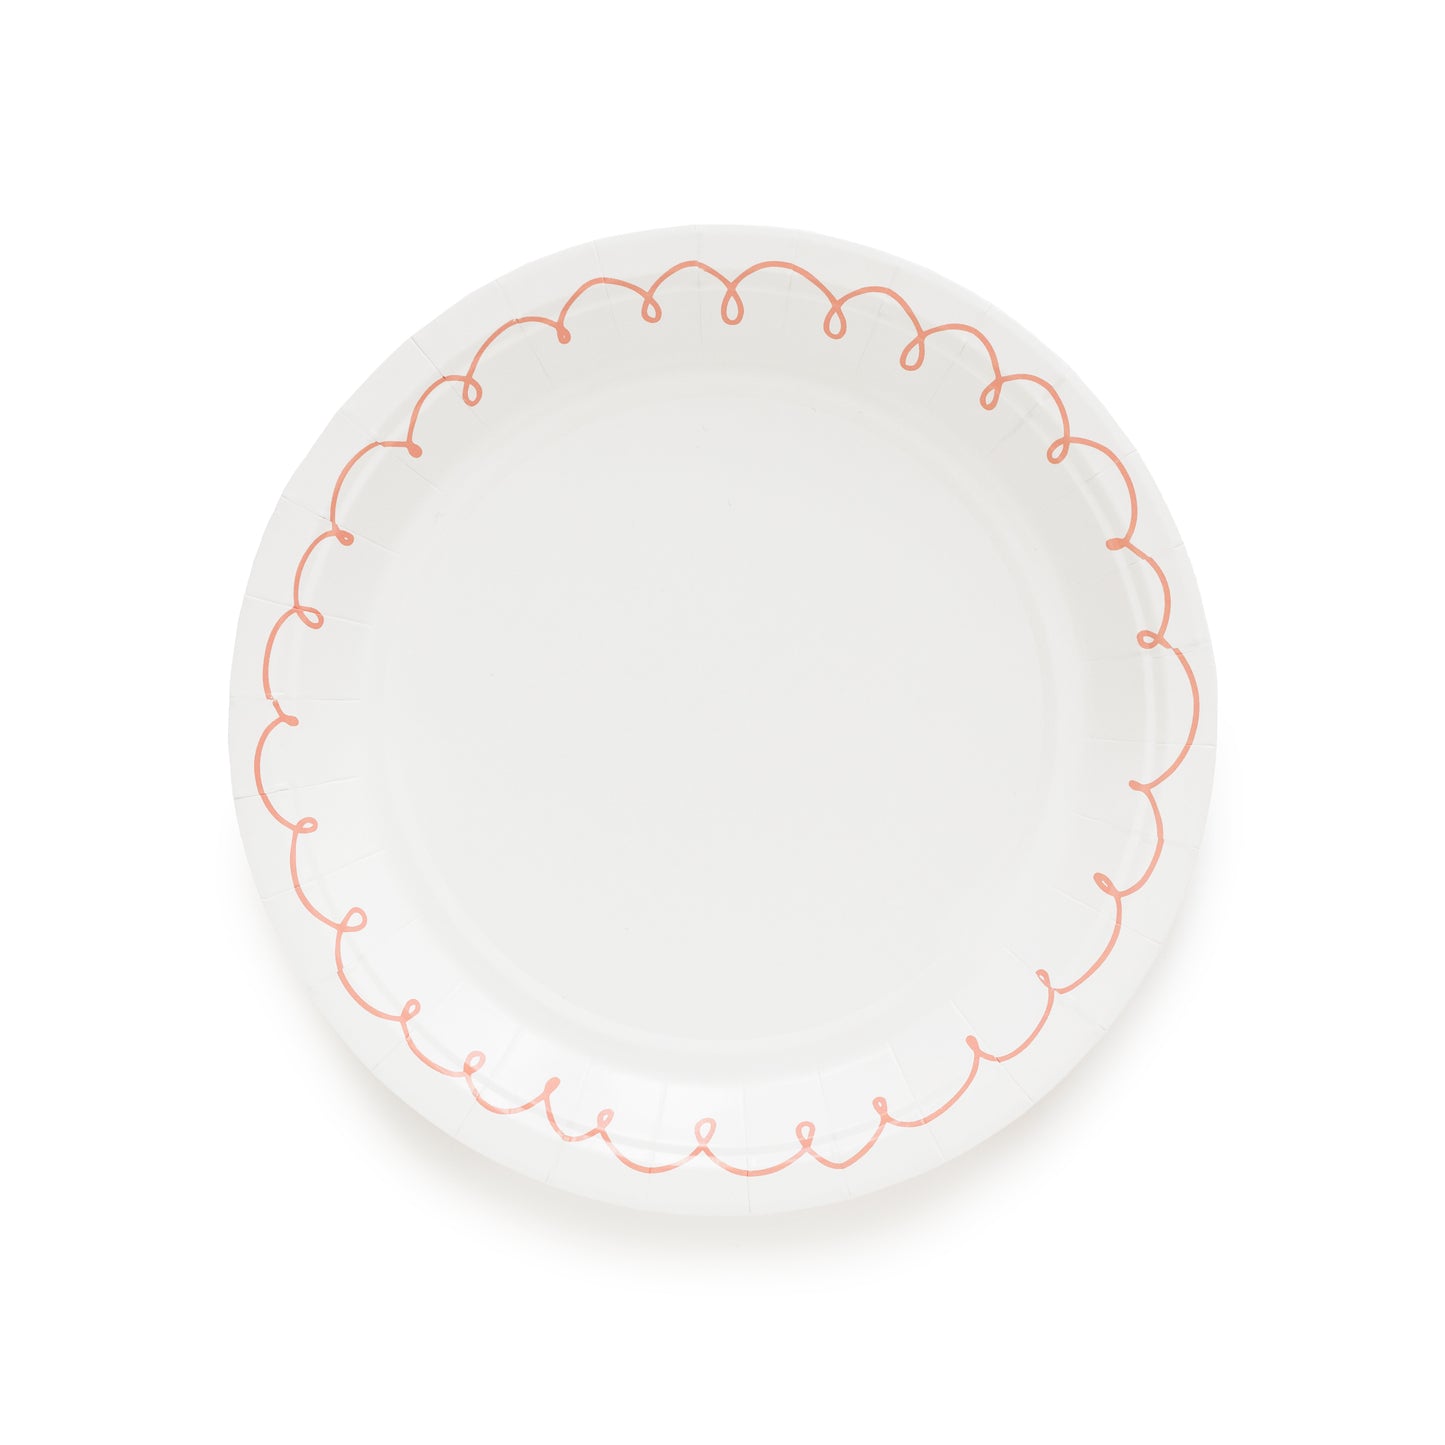 Small white paper plates with pink swirl